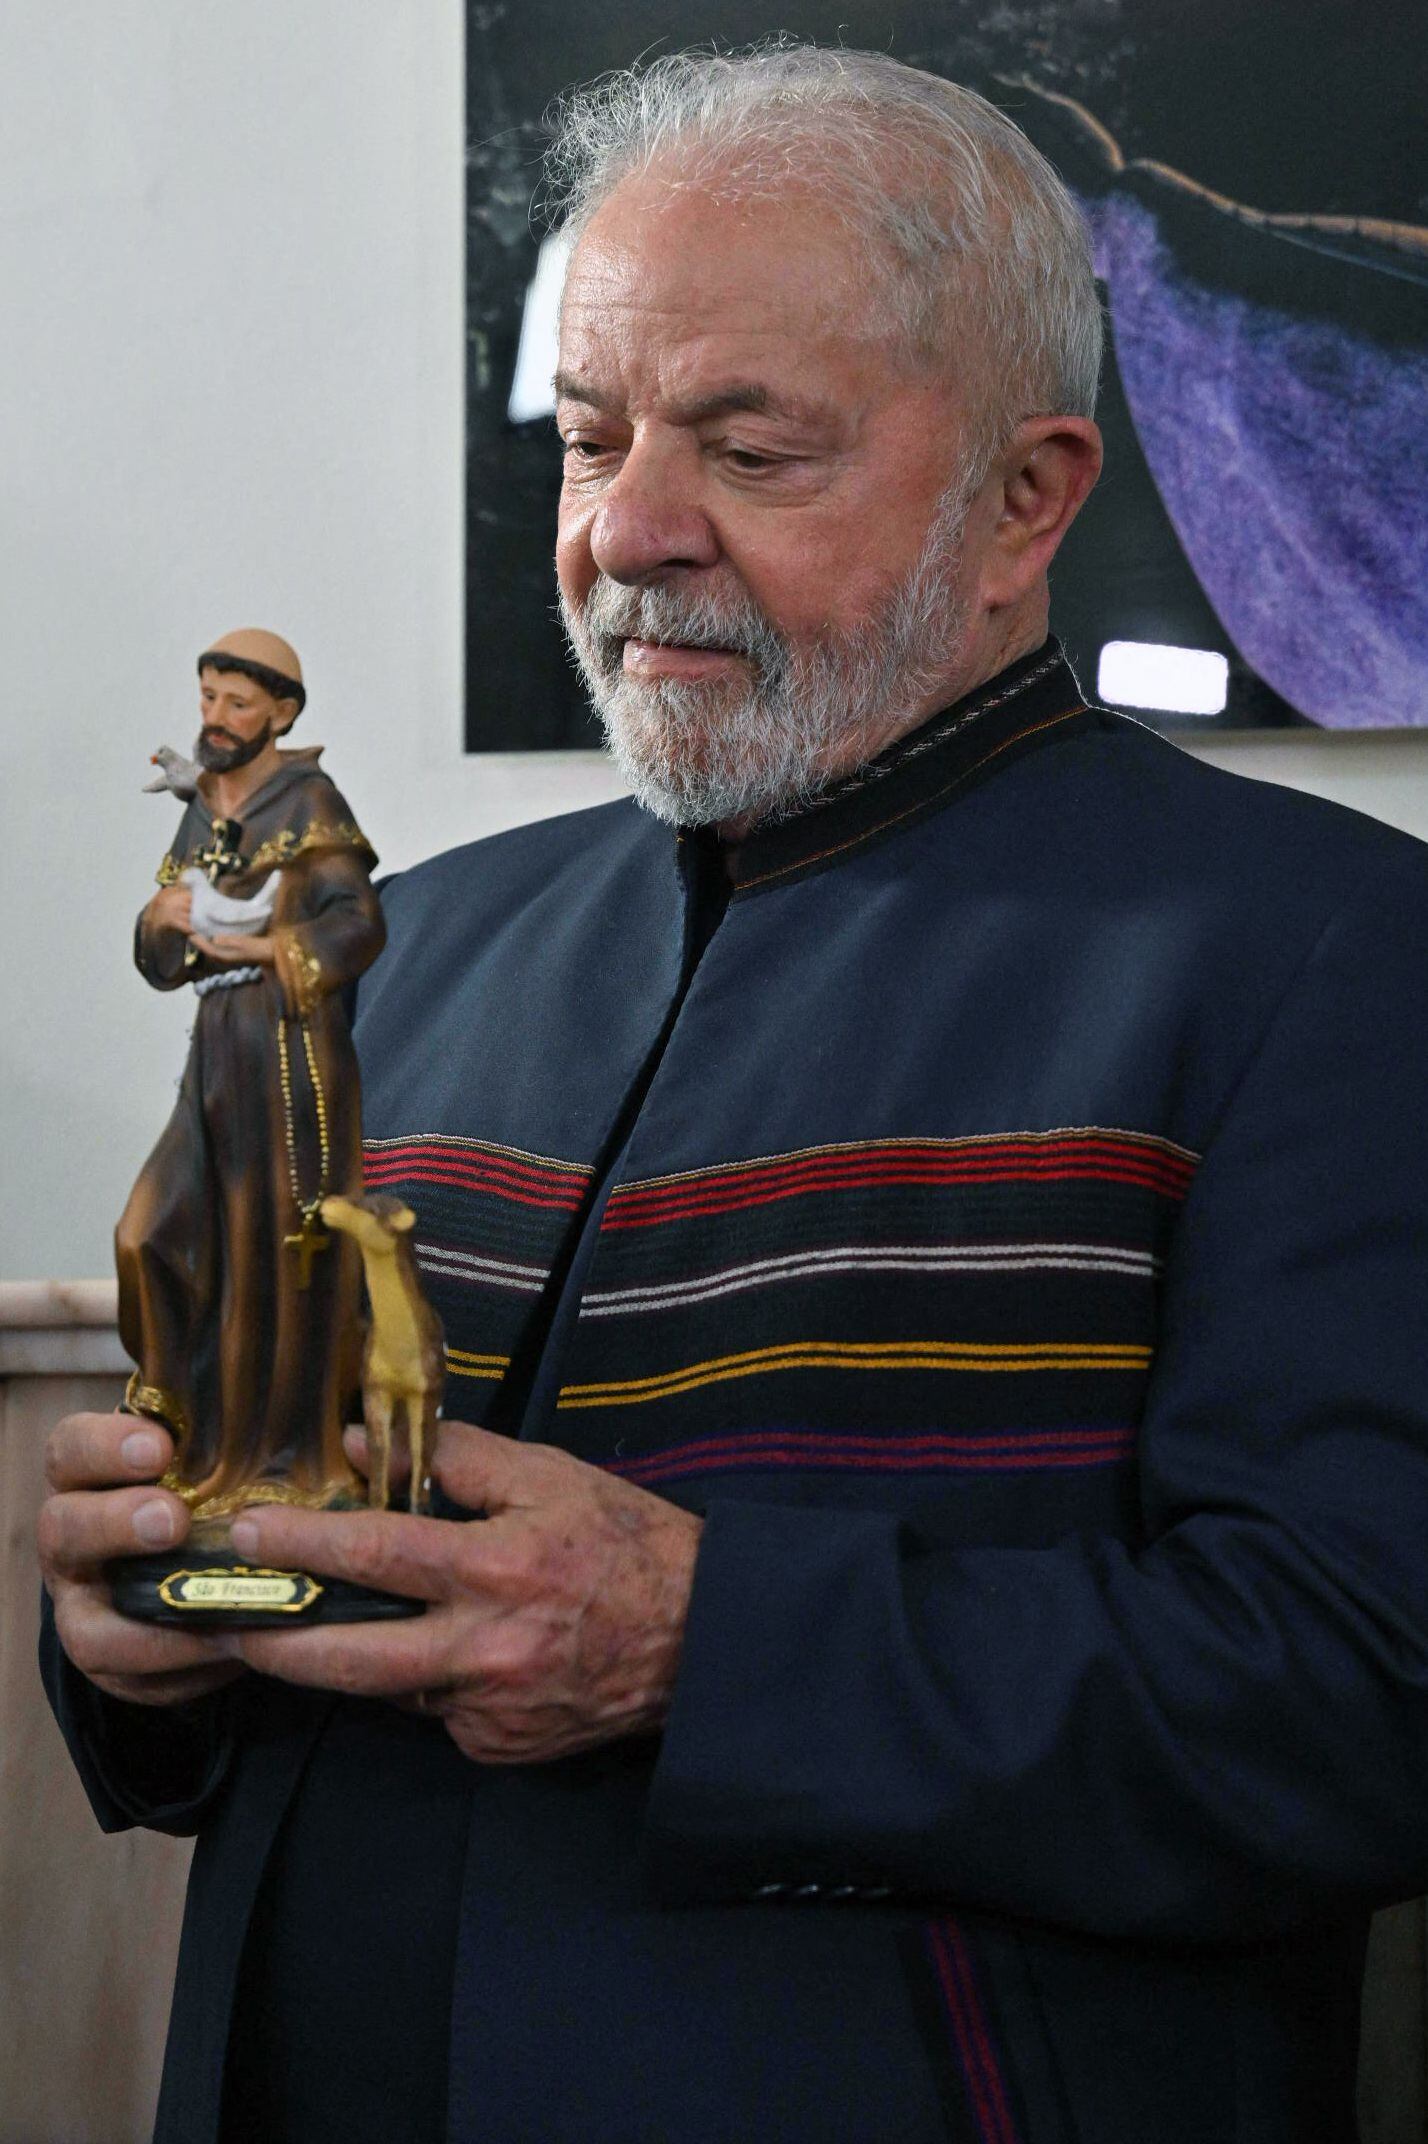 Lula da Silva holds an image of Saint Francis of Assisi that was given to him during a meeting with Franciscan friars to commemorate Saint Francis Day.  (Photo: AFP)